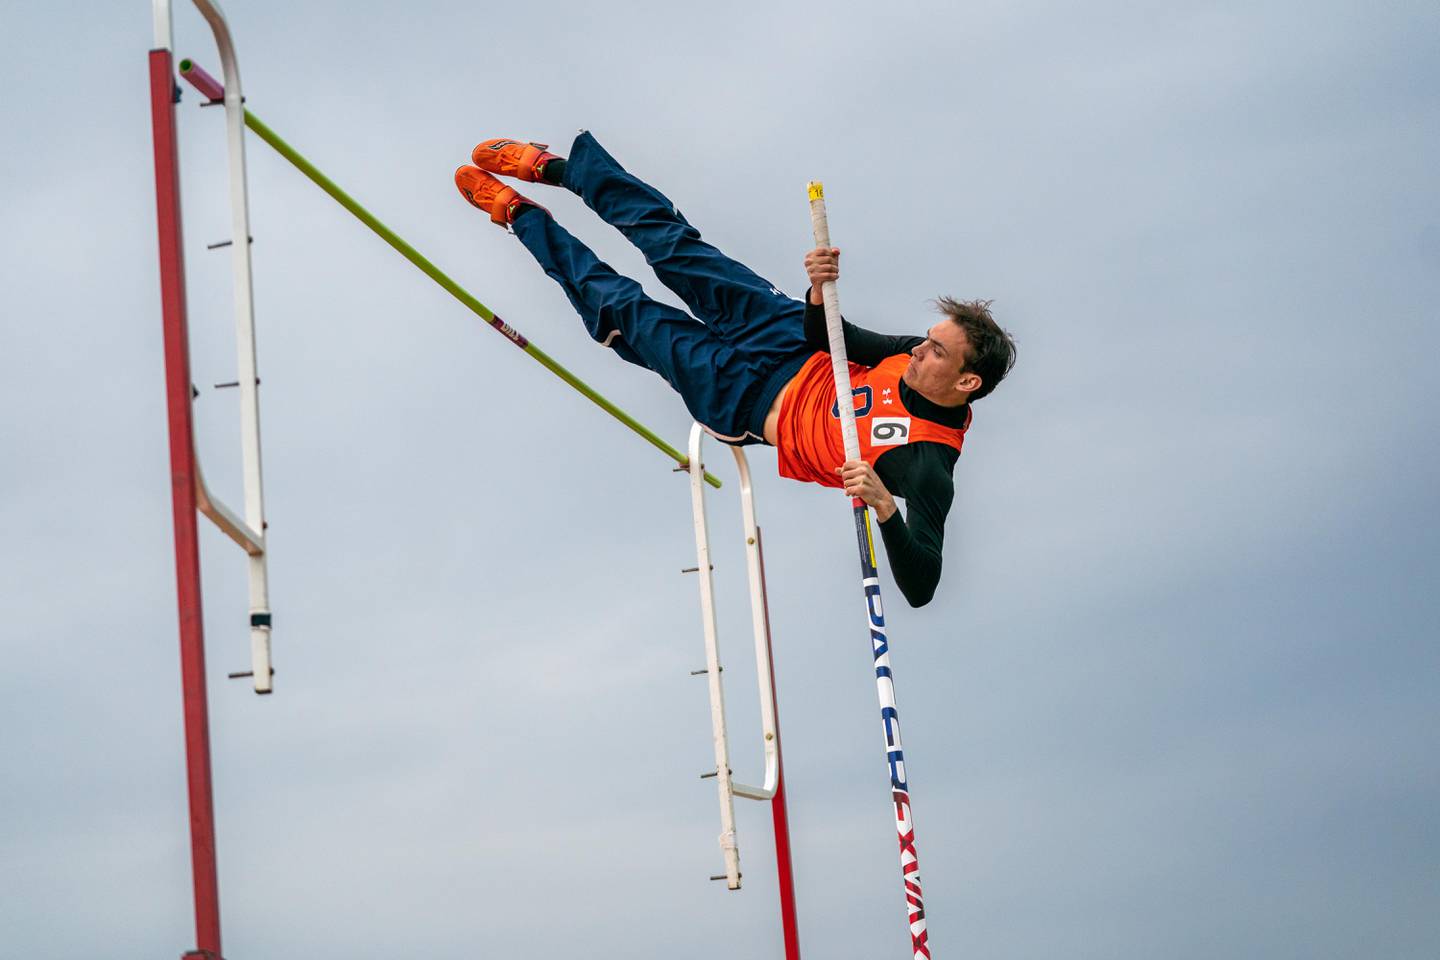 Oswego’s Christian Sobecki competes in the pole vault during the Roger Wilcox Track and Field Invitational at Oswego High School on Friday, April 29, 2022.